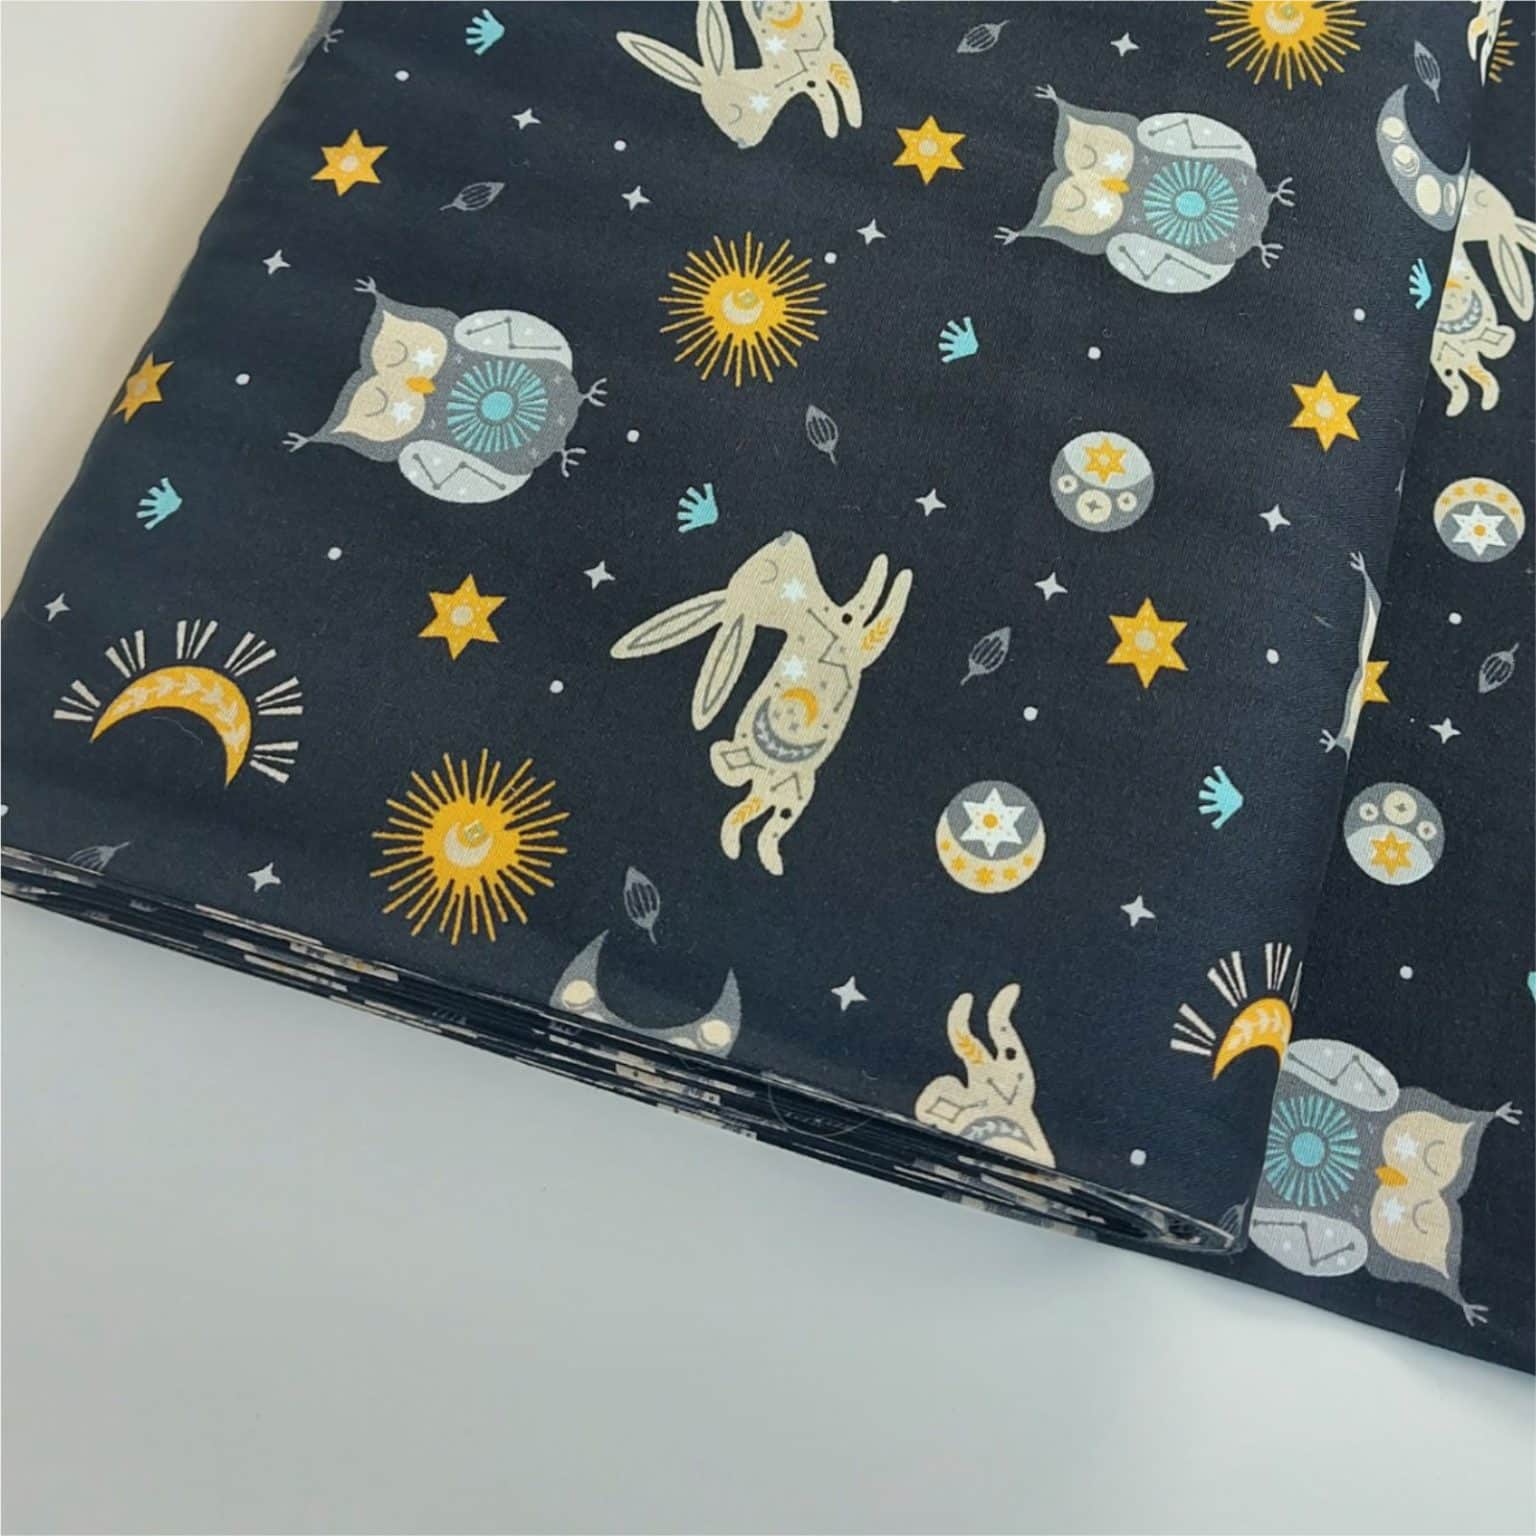 Dreamy Owl & Rabbit Brushed Poplin | More Sewing